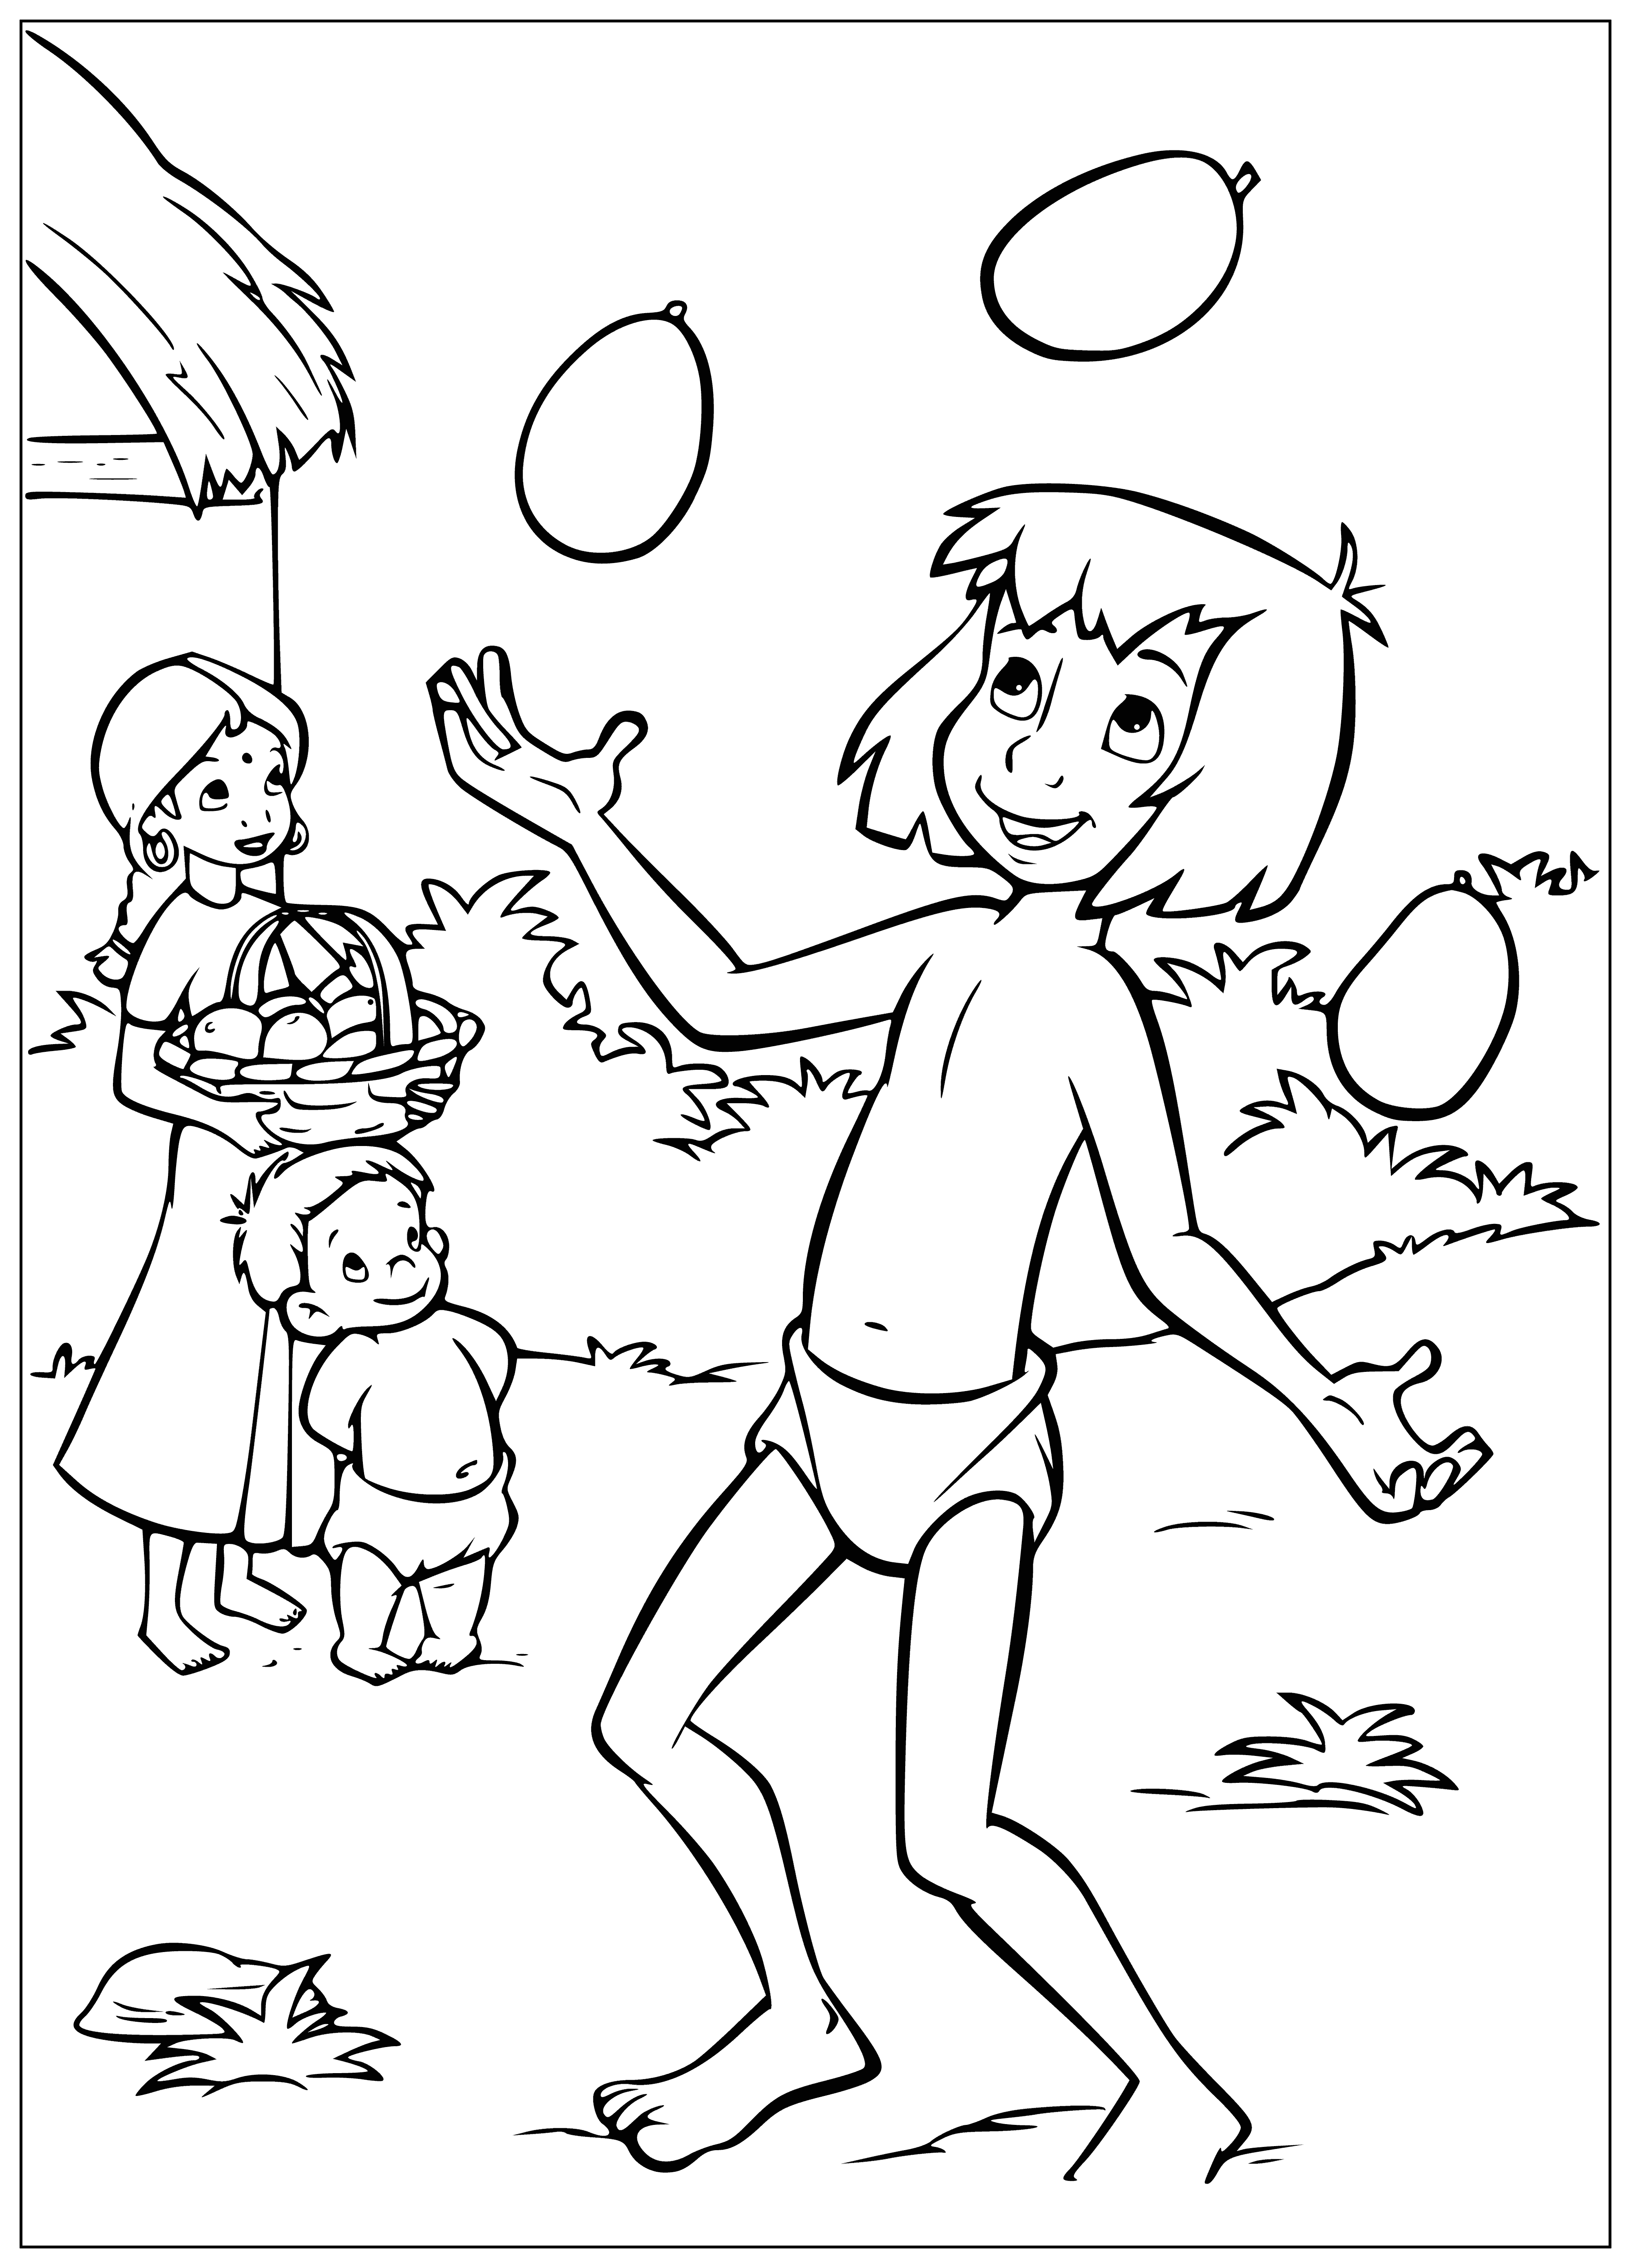 coloring page: Mowgli juggles barefoot in a wild jungle setting, wearing a loincloth with a knife and intense eyes.